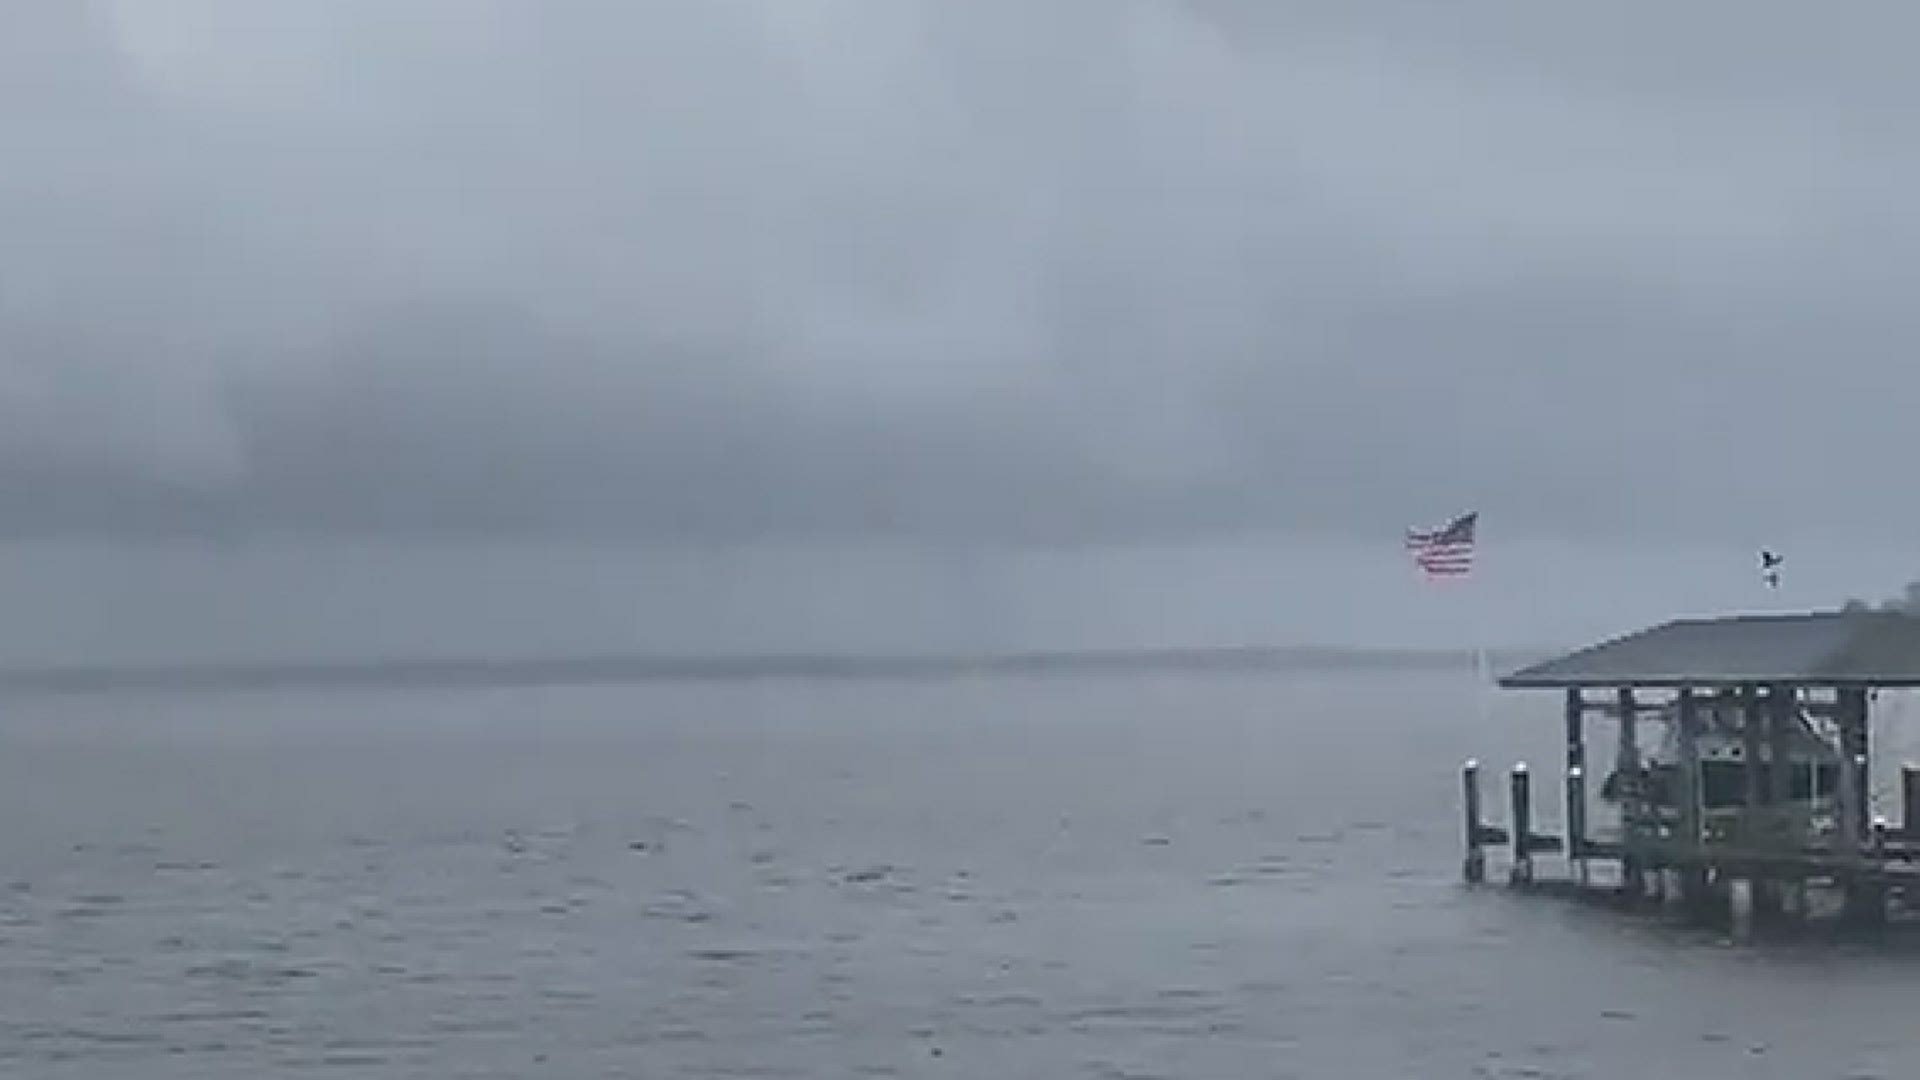 Dr. Eddy Gutierrez sent in this video of a water spout in the St. Johns River. He said he took it between Avondale and Ortega.
Credit: Eddy Gutierrez